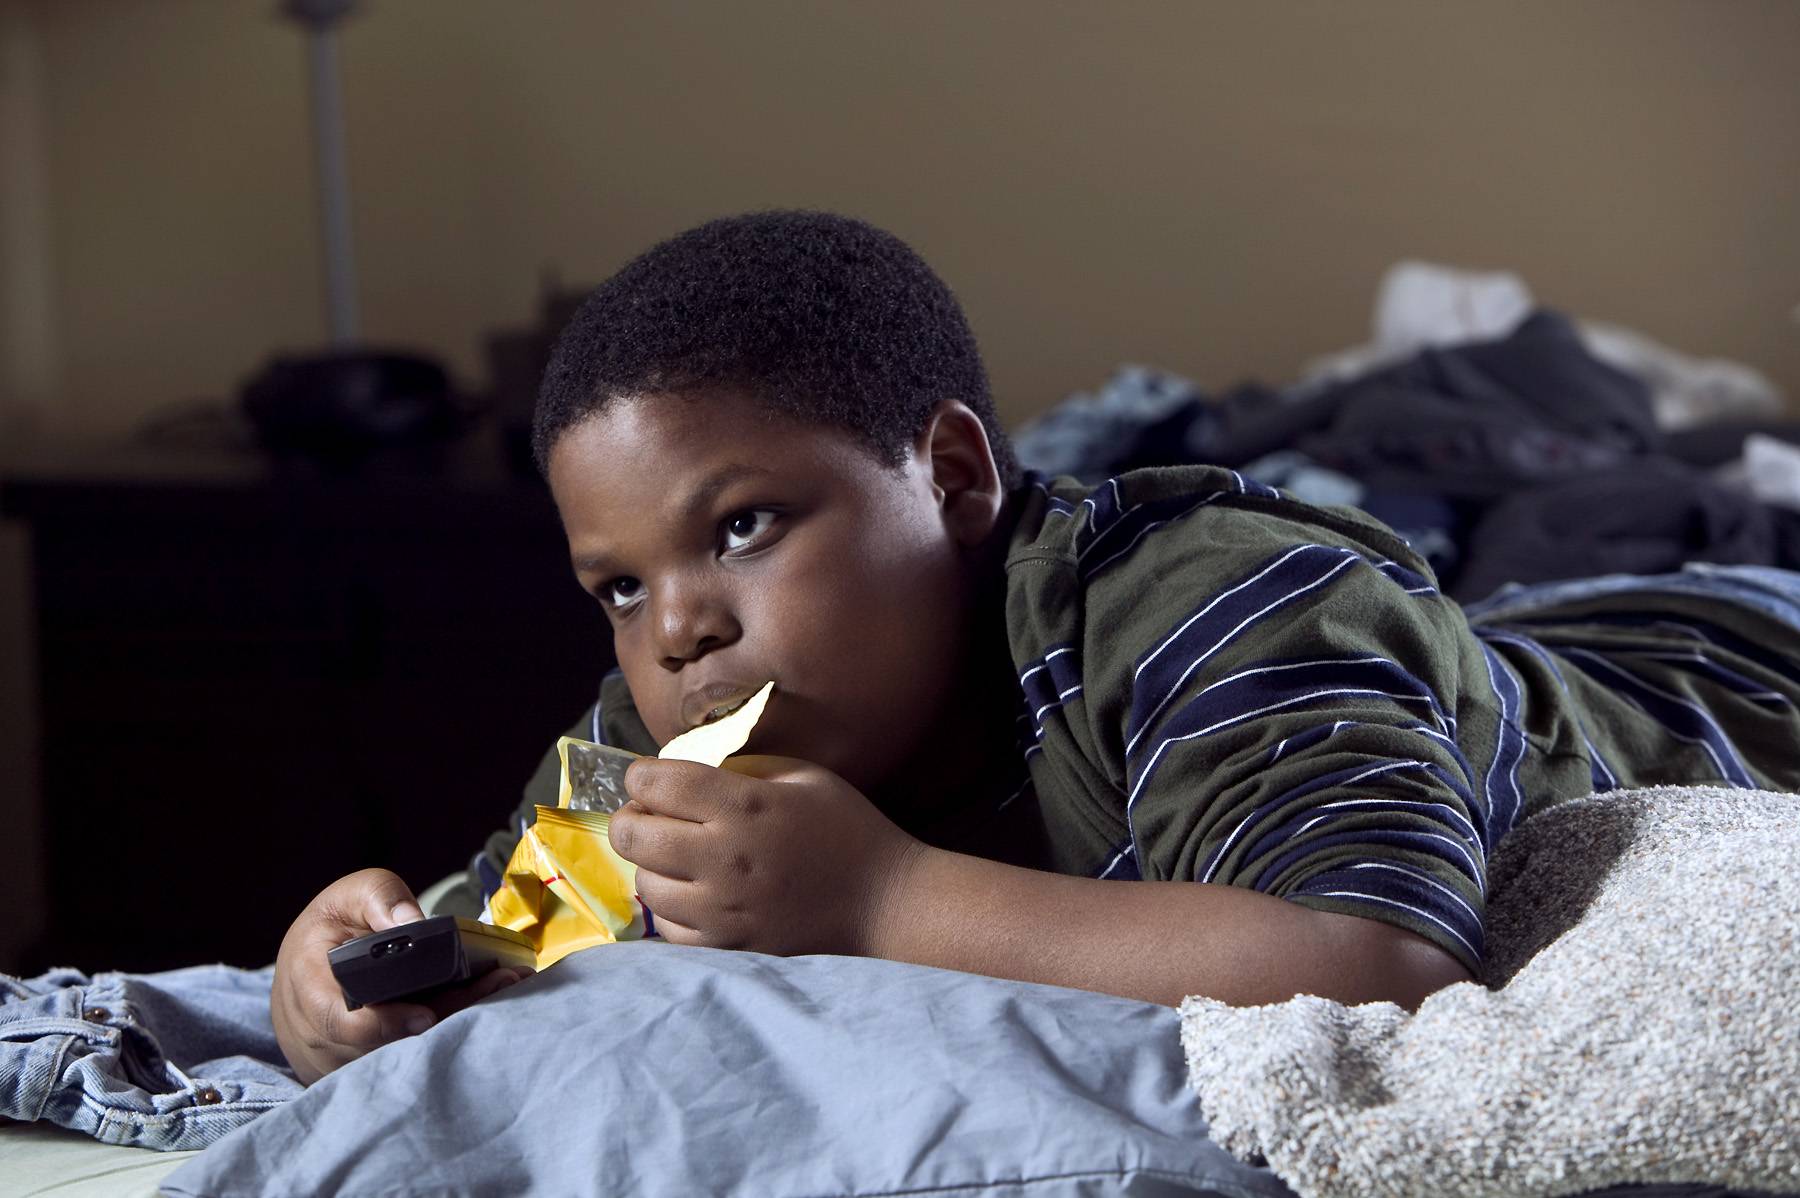 Can Extra Body Weight Explain Asthma in Kids of Color?